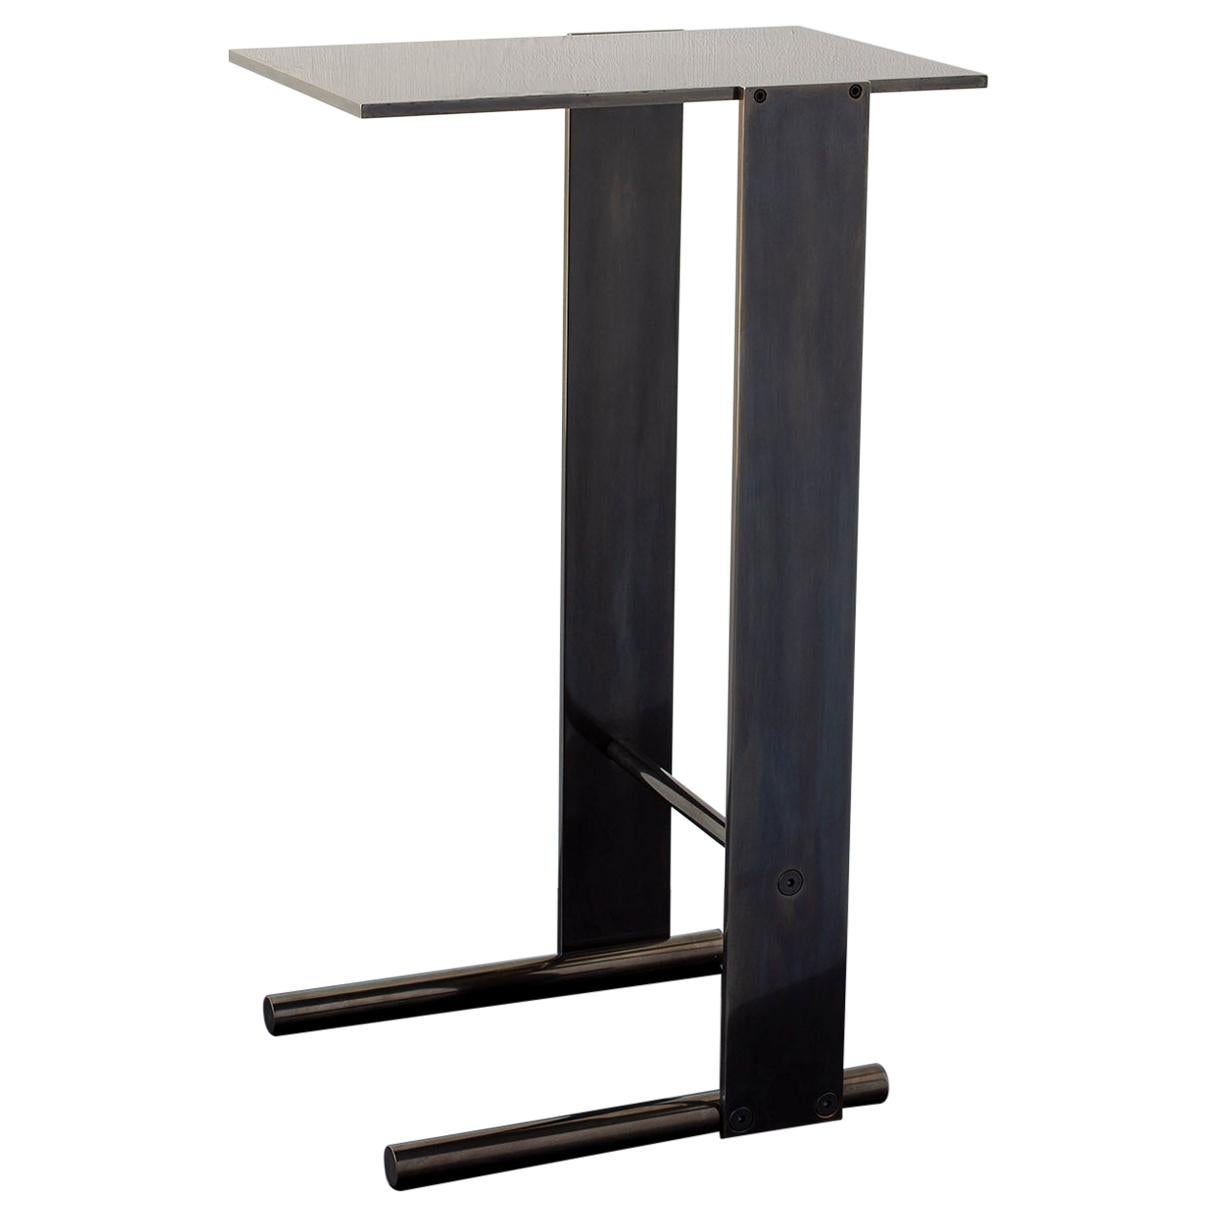 Untitled Side Table 1.0 Dark Patinated Brass Small Accent, End or Drink Stand